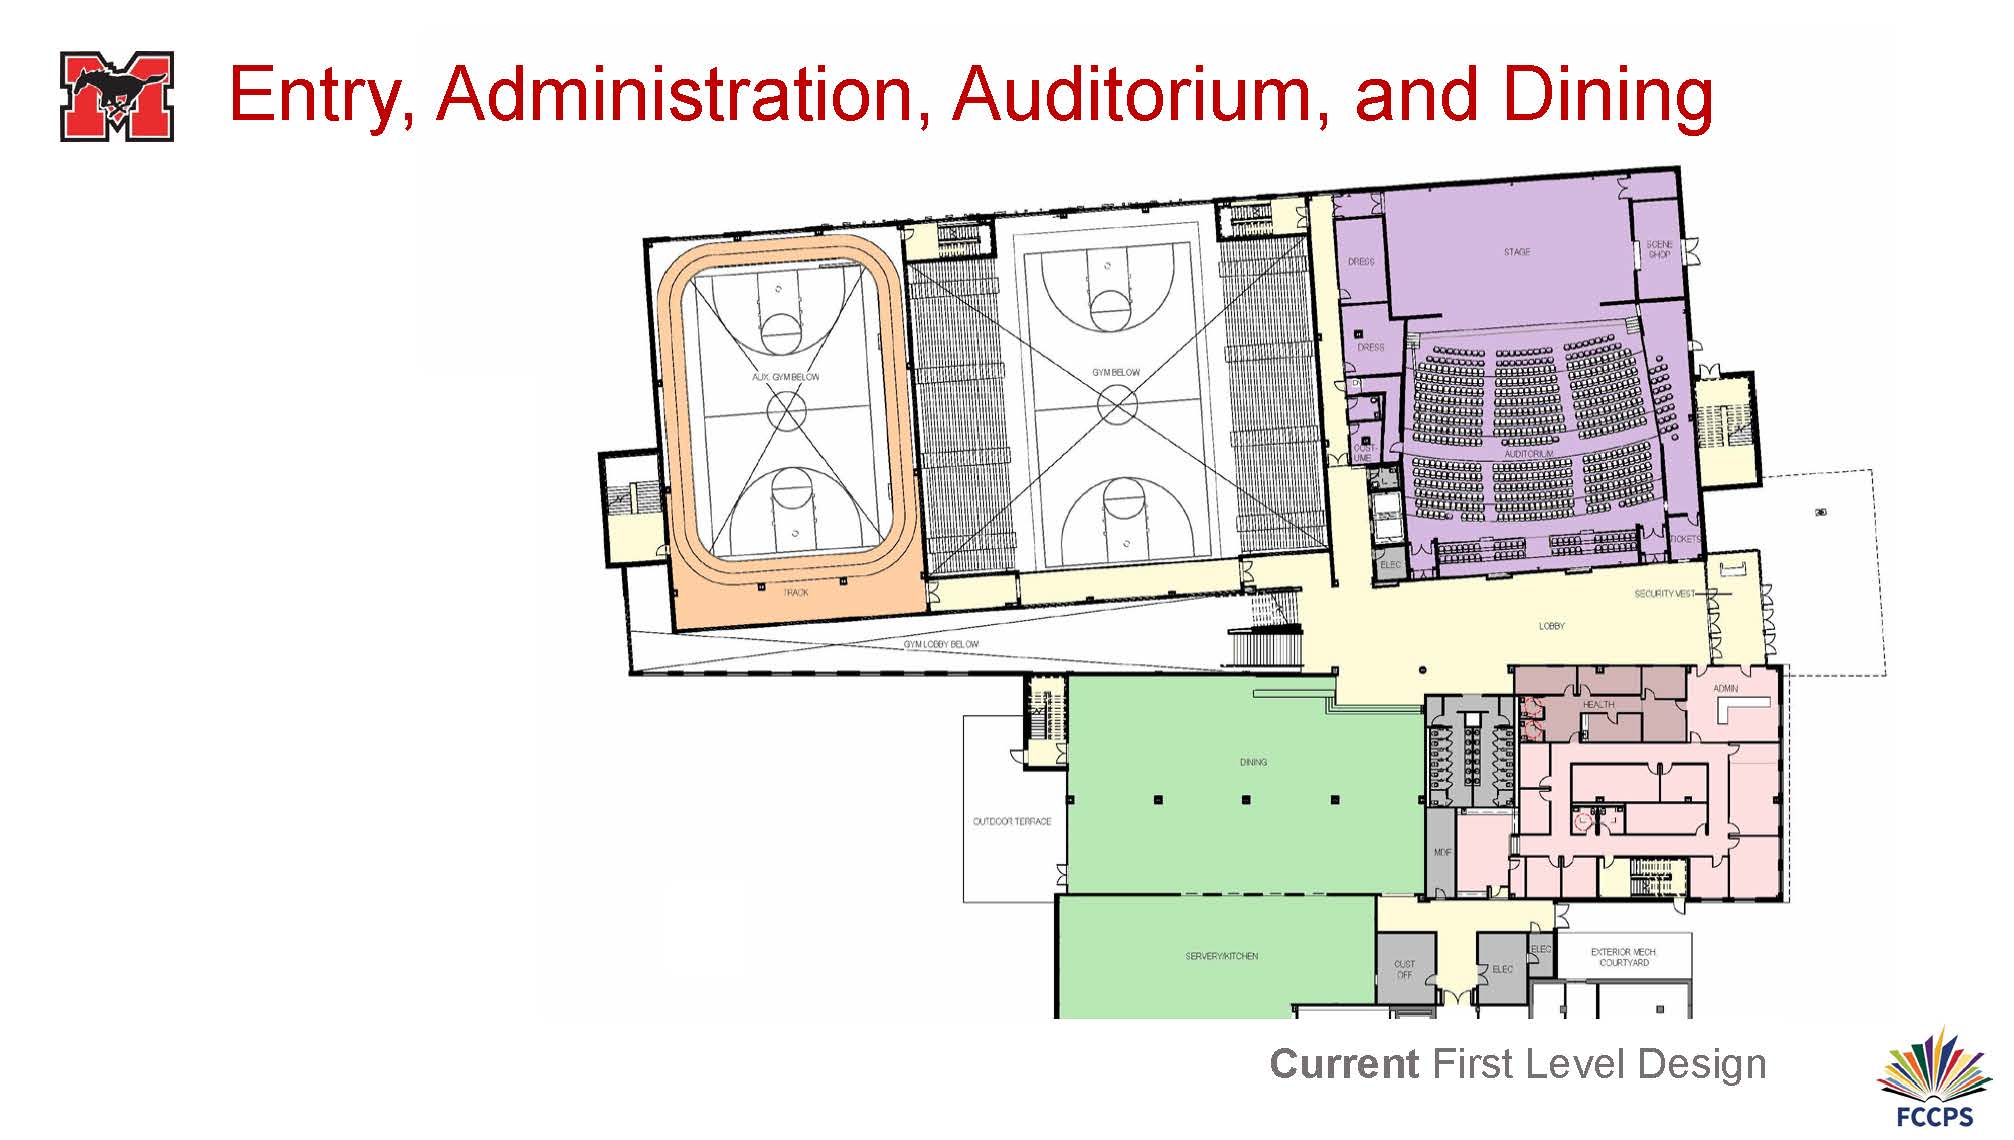 Entry, Administration, Auditorium, and Dining